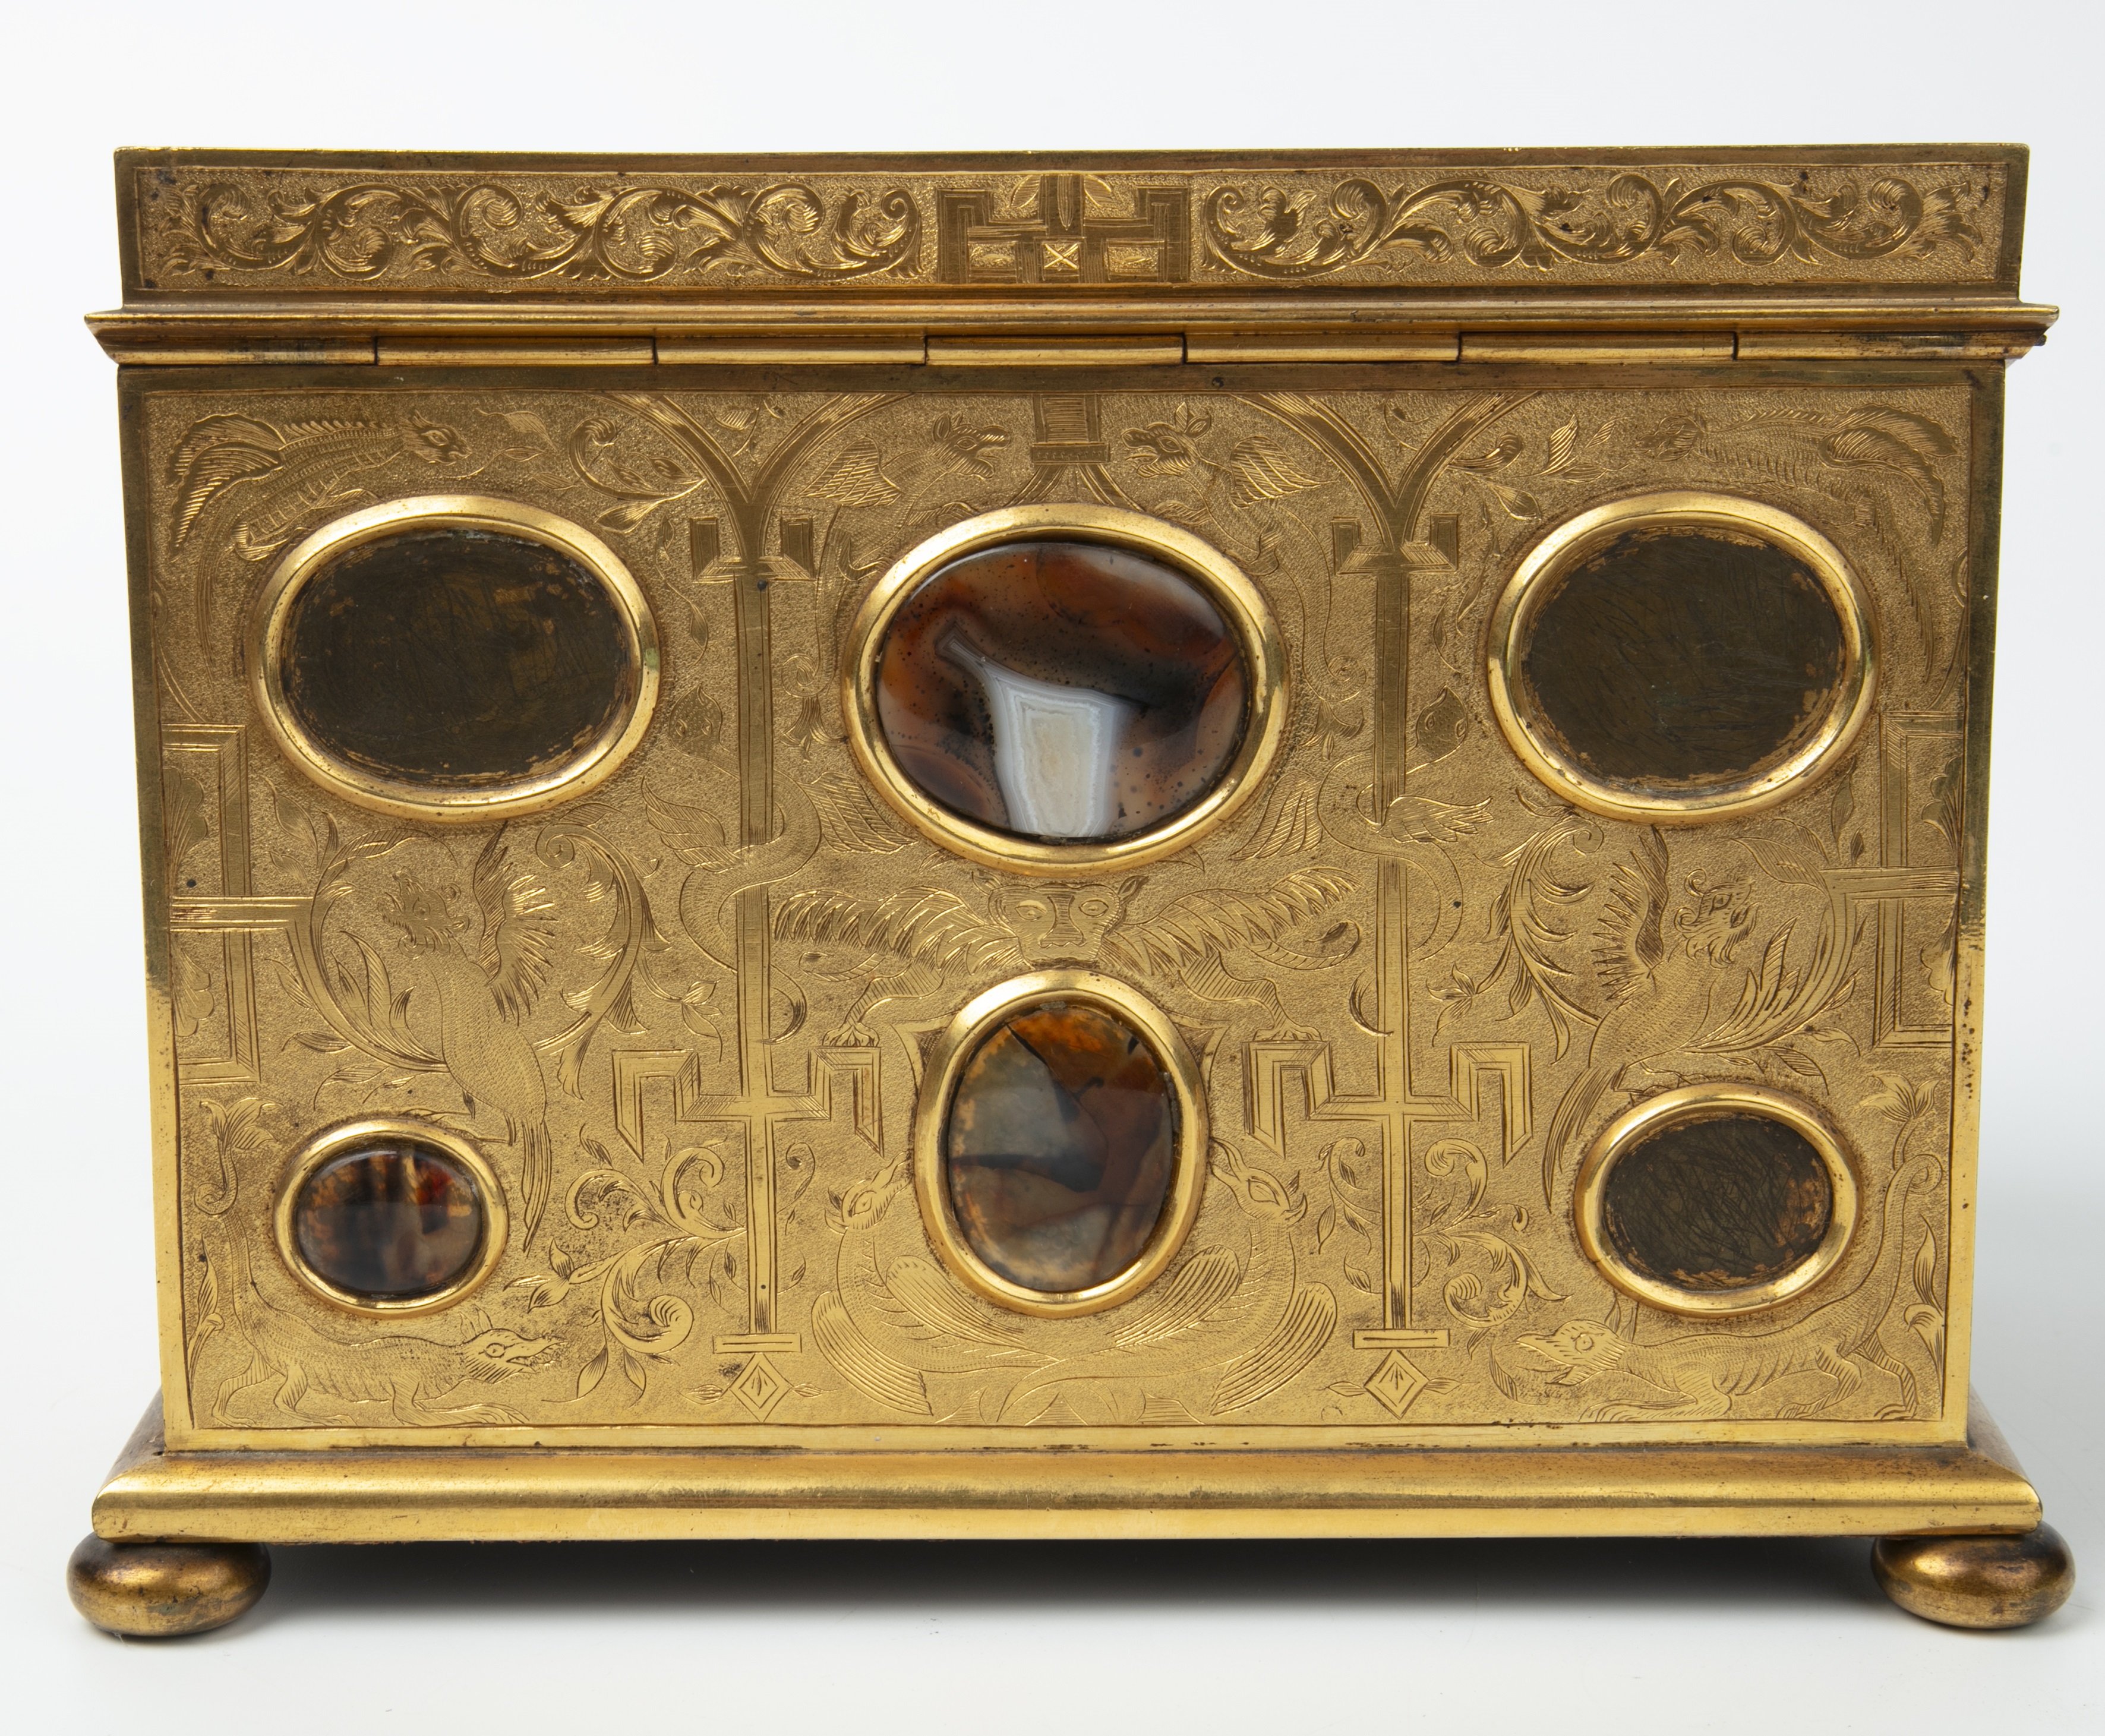 A 19th century correspondence gilt box with engraved decoration and inset cabochon stones hardstones - Image 5 of 25